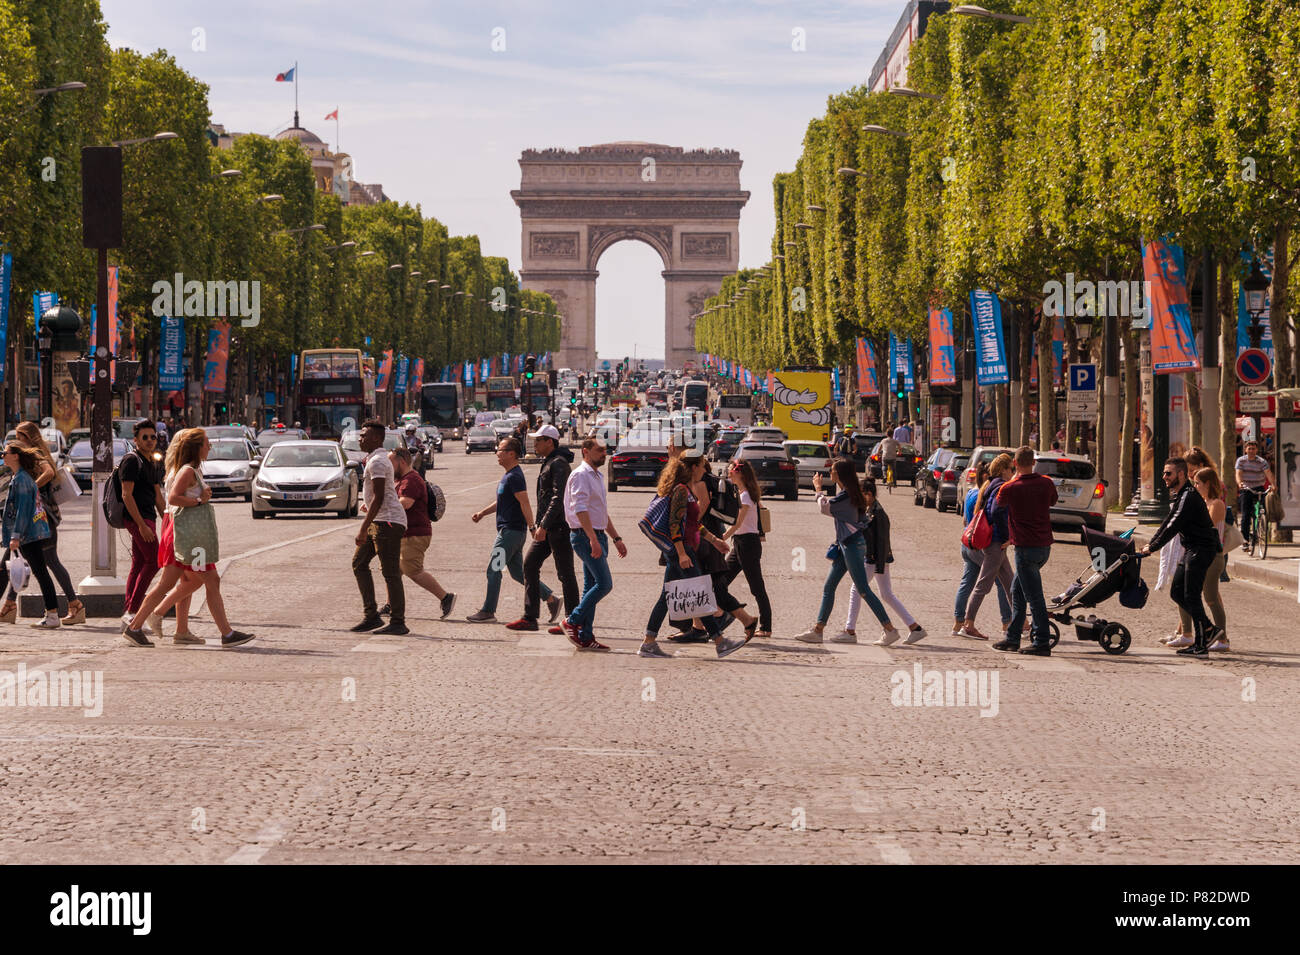 Paris, France - 23 June 2018: A crowd of people crossing Avenue des Champs-Elysees with Arc de Triomphe in the Background Stock Photo